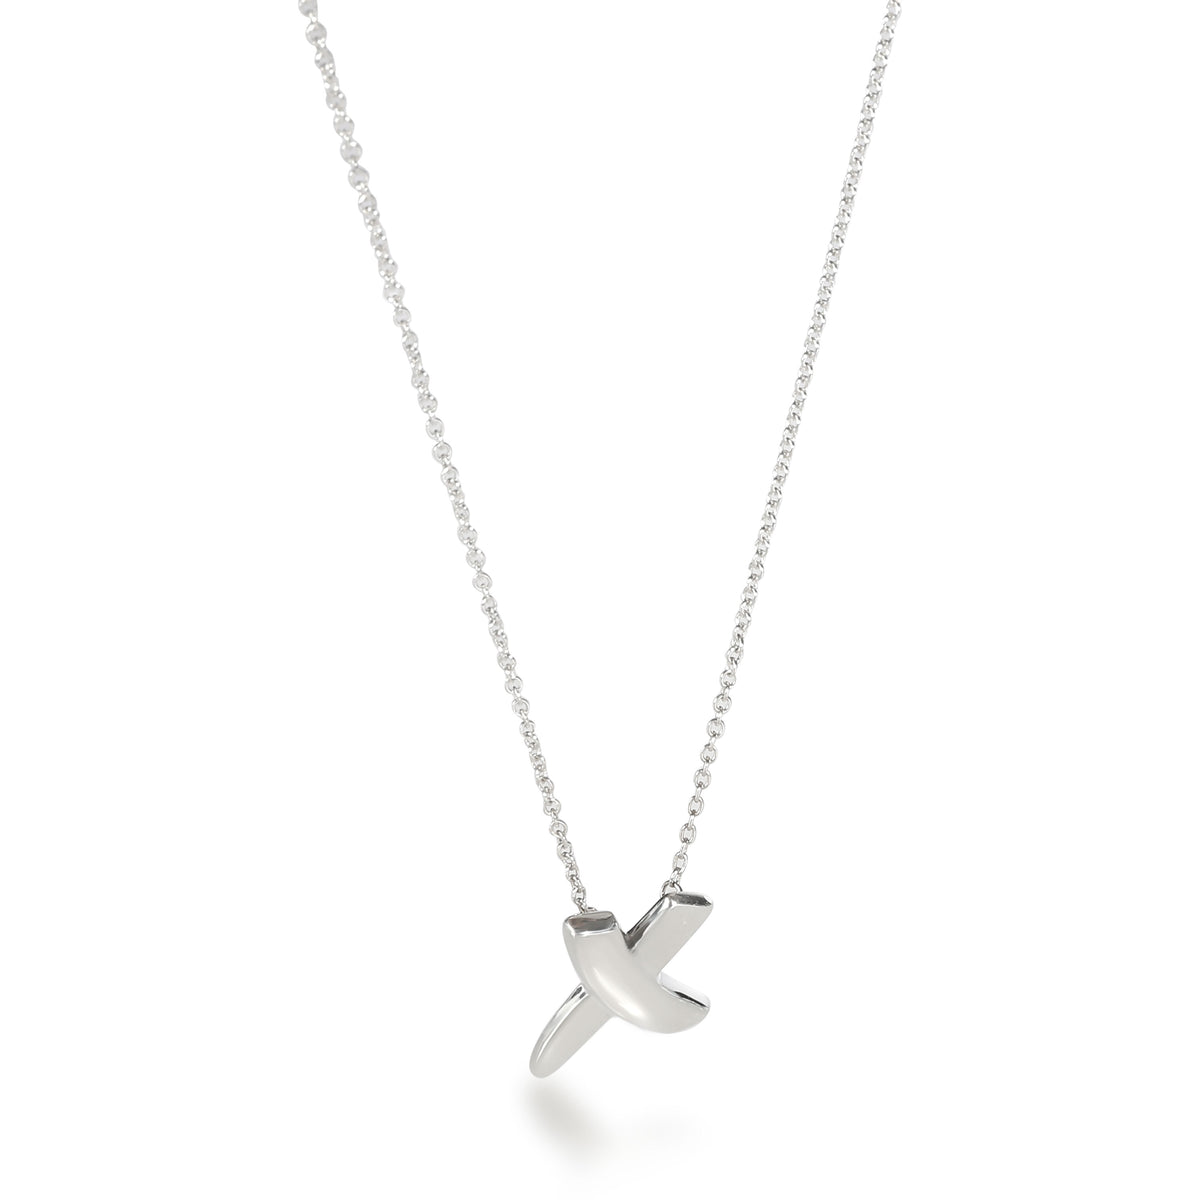 Tiffany & Co. Paloma Picasso X Necklace in  Sterling Silver